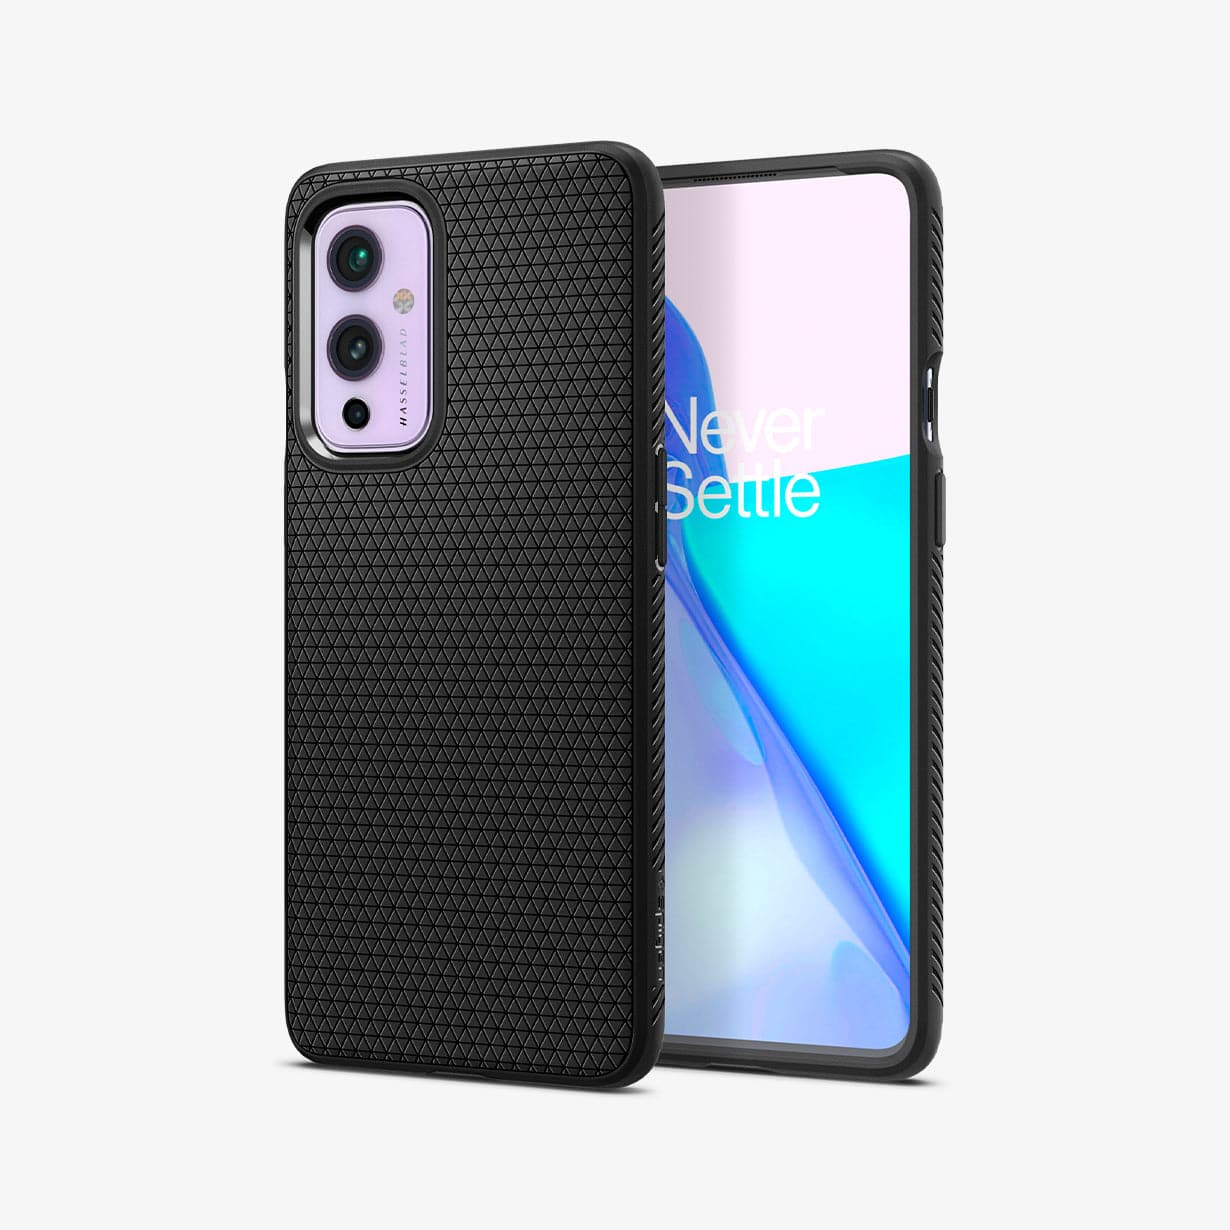 ACS02684 - OnePlus 9 5G Liquid Air Case in Matte Black showing the front and back side by side